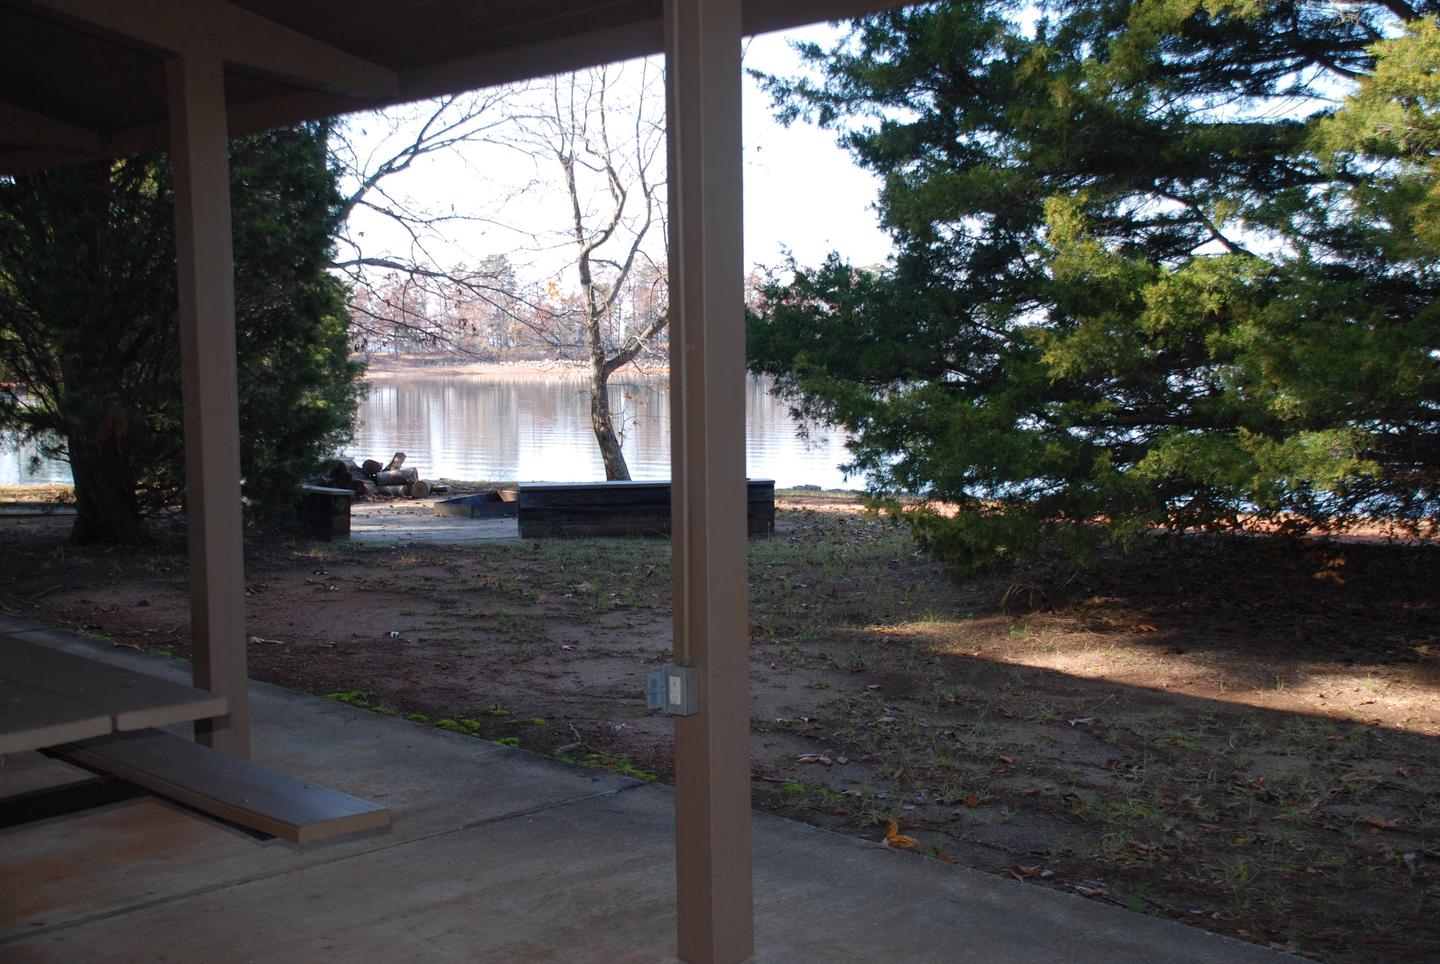 VIEW FROM A PICNIC SHELTER